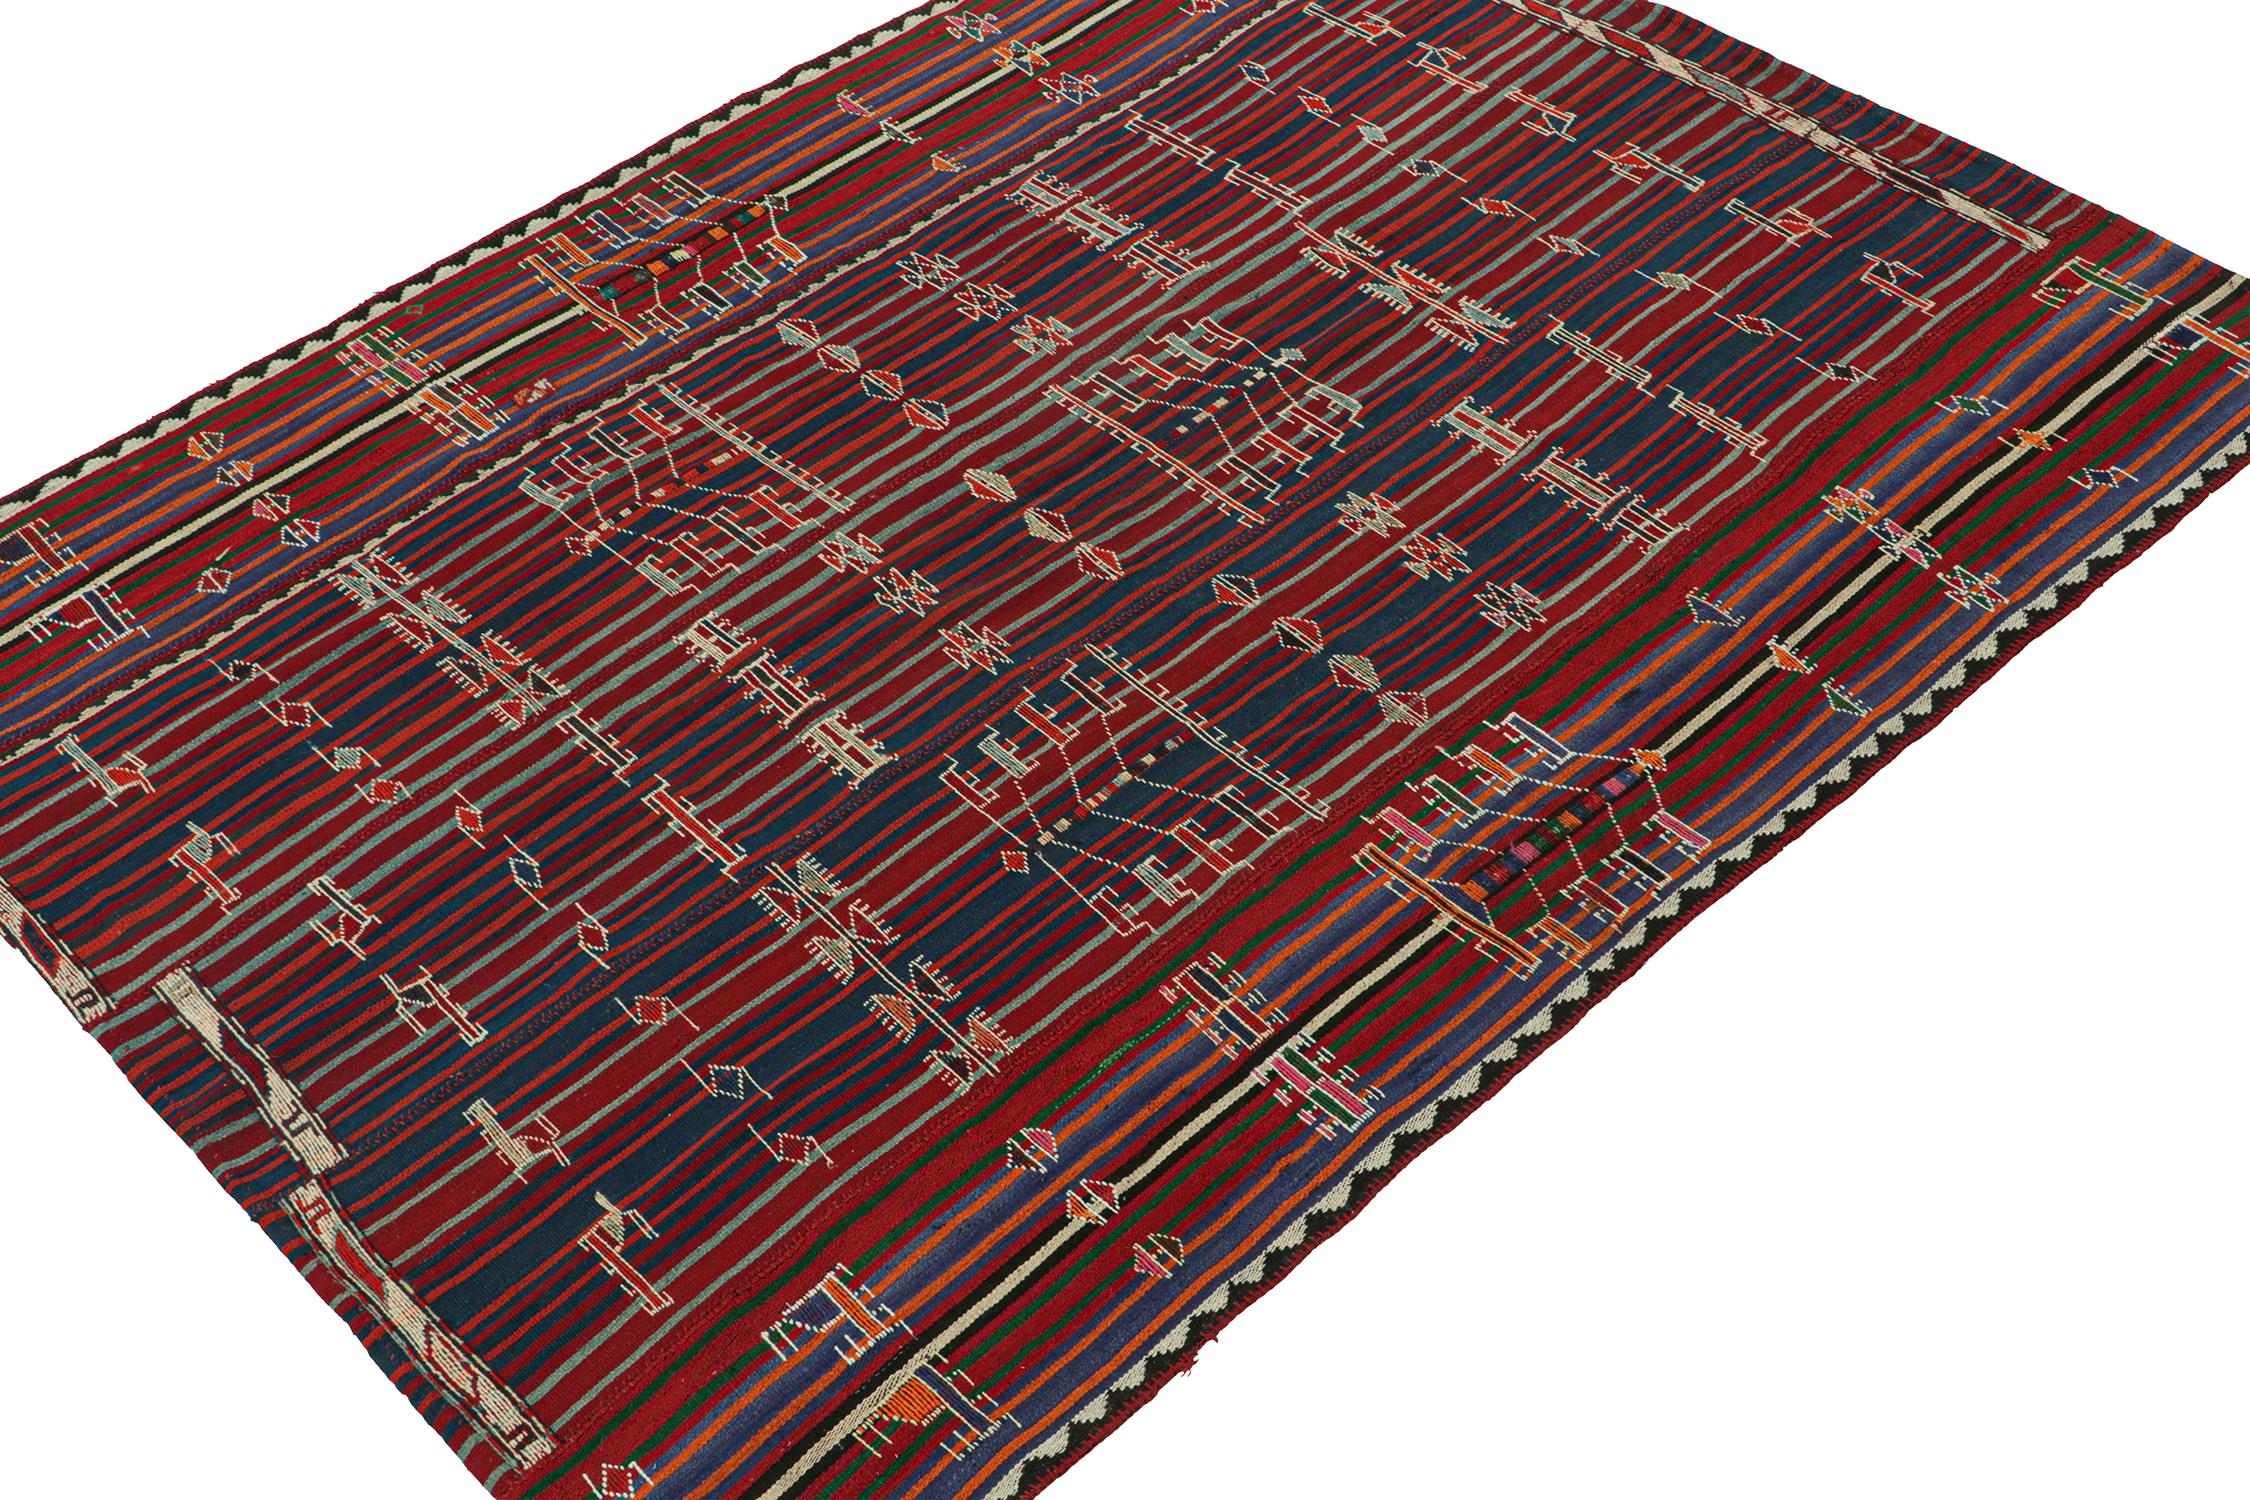 This vintage 7x9 Shahsavan kilim is a unique tribal rug for its period—hailing from Persia circa 1950-1960. Handwoven in wool.

Further on the Design:

The field hosts stripes and embroidered motifs in navy blue and red with orange and pink